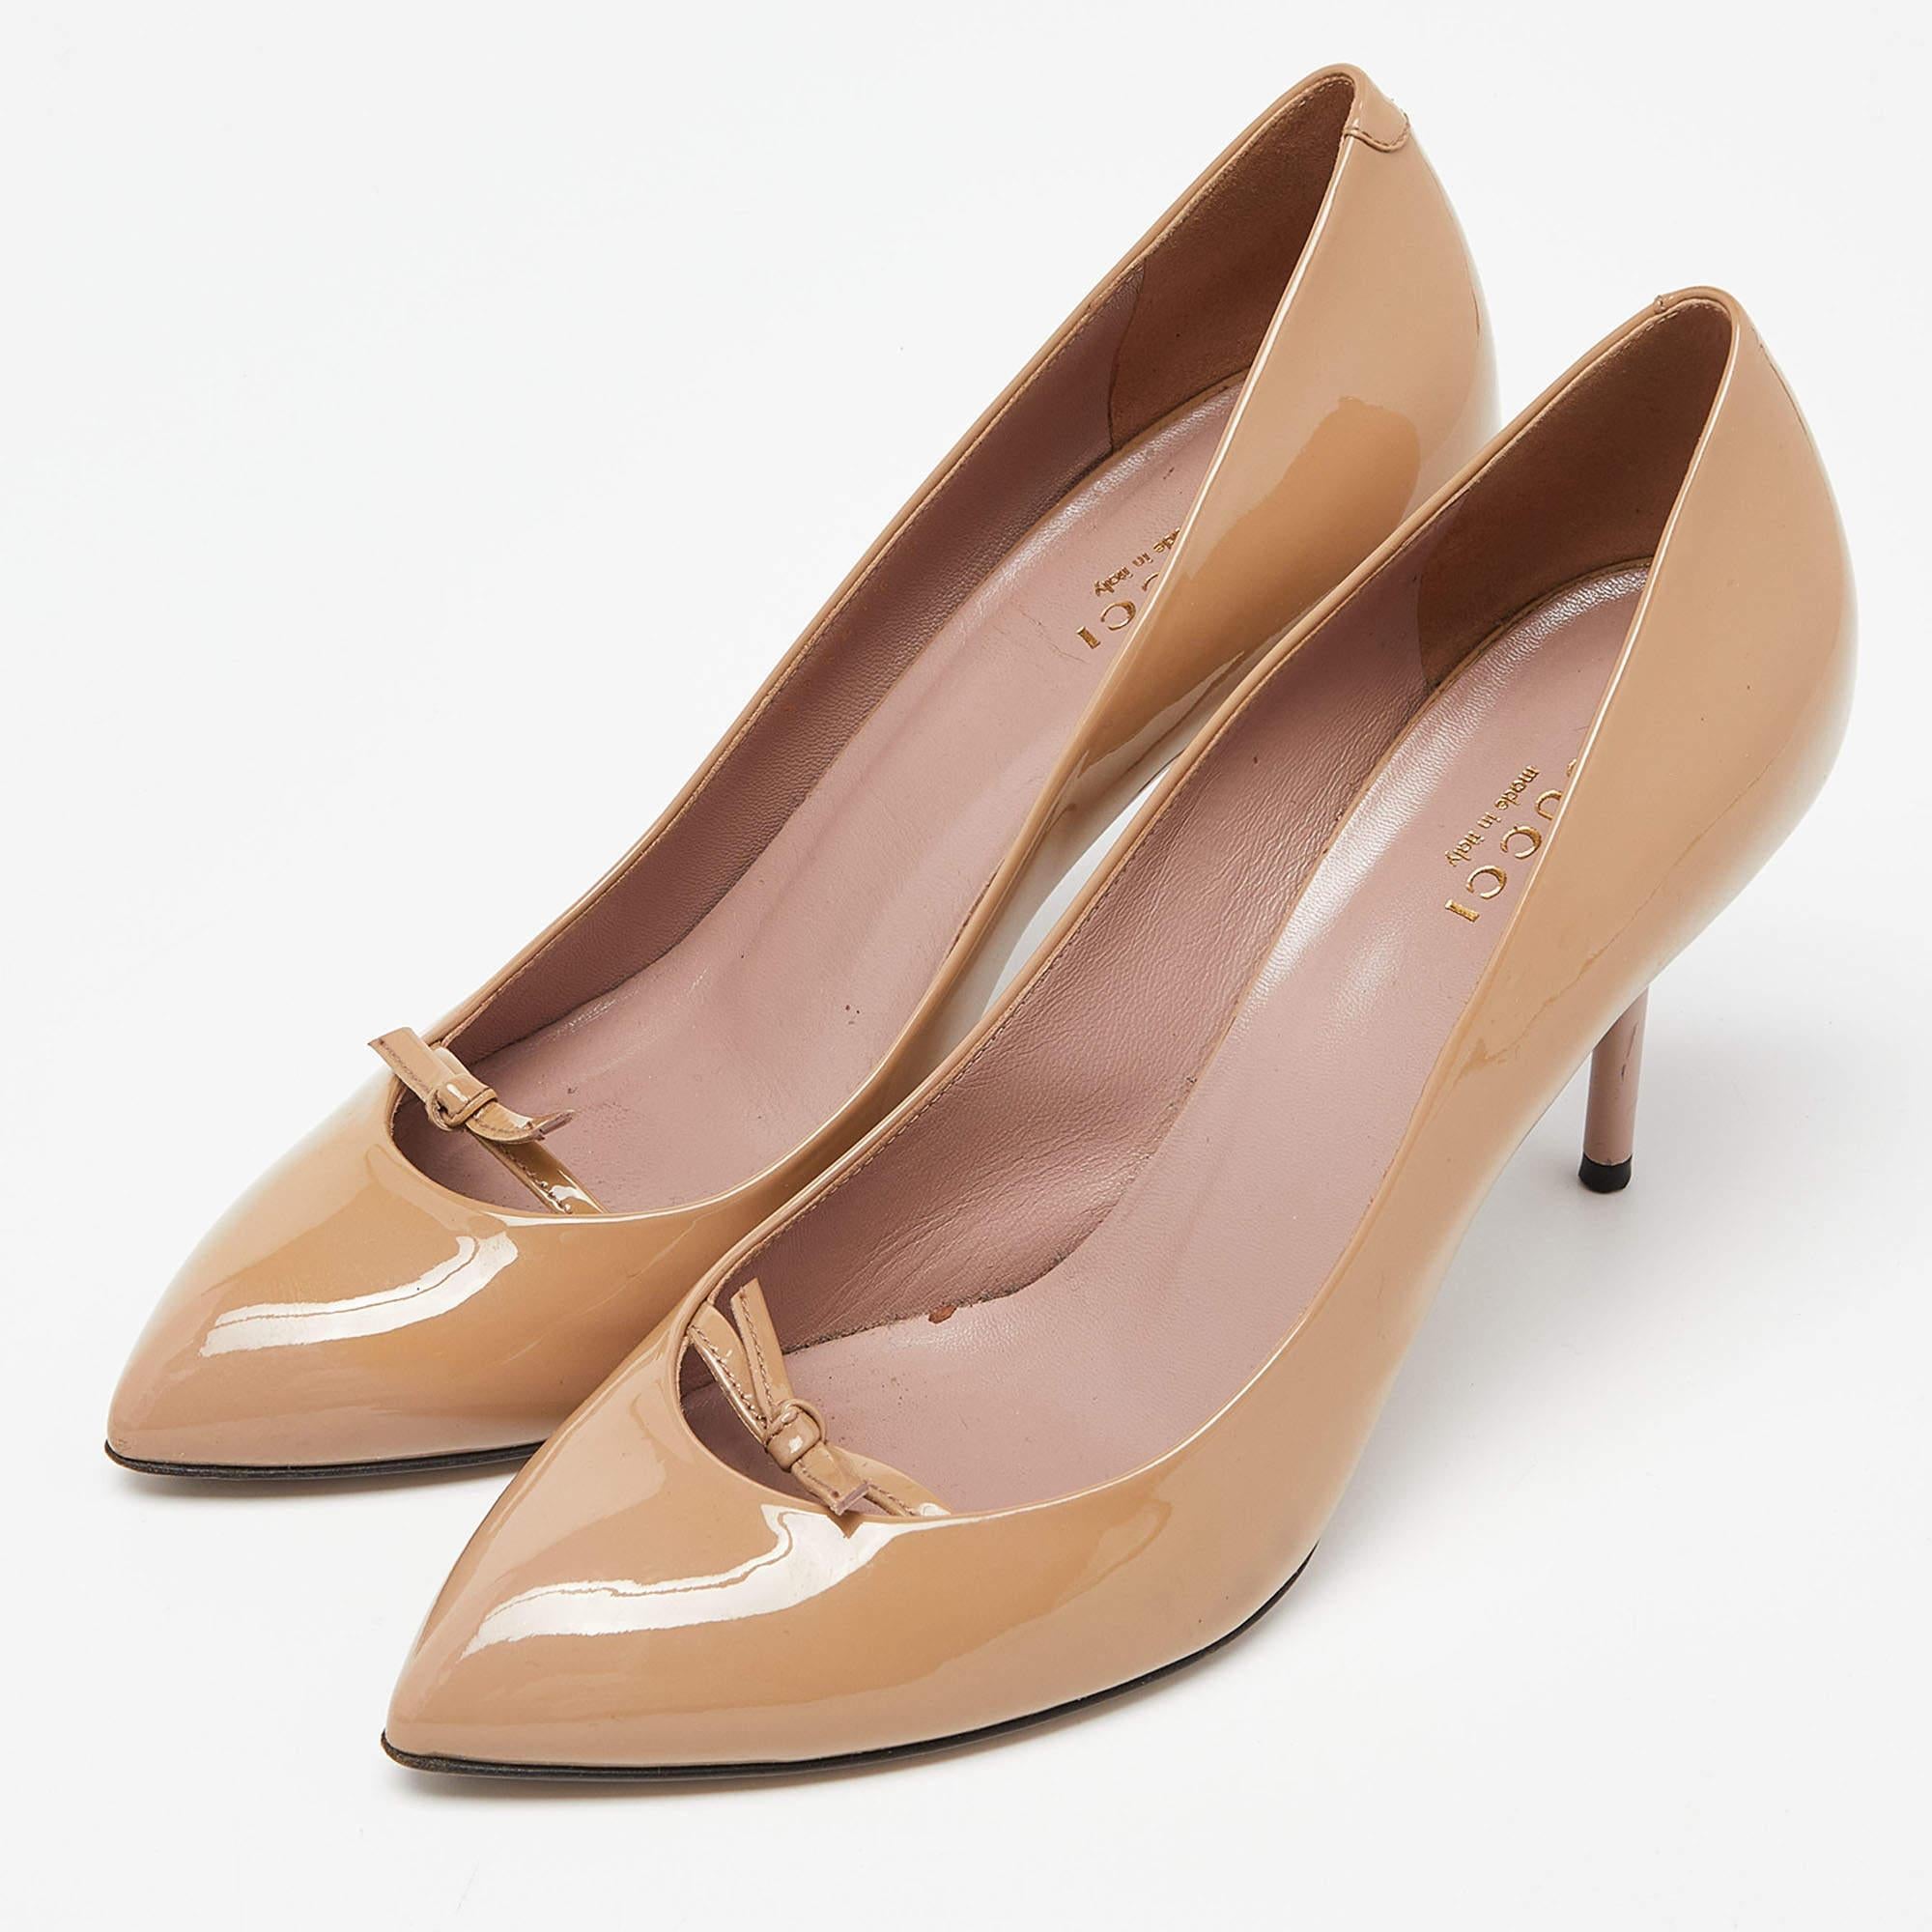 Gucci Beige Patent Leather Knotted Bow Detail Pumps Size 37 For Sale 3